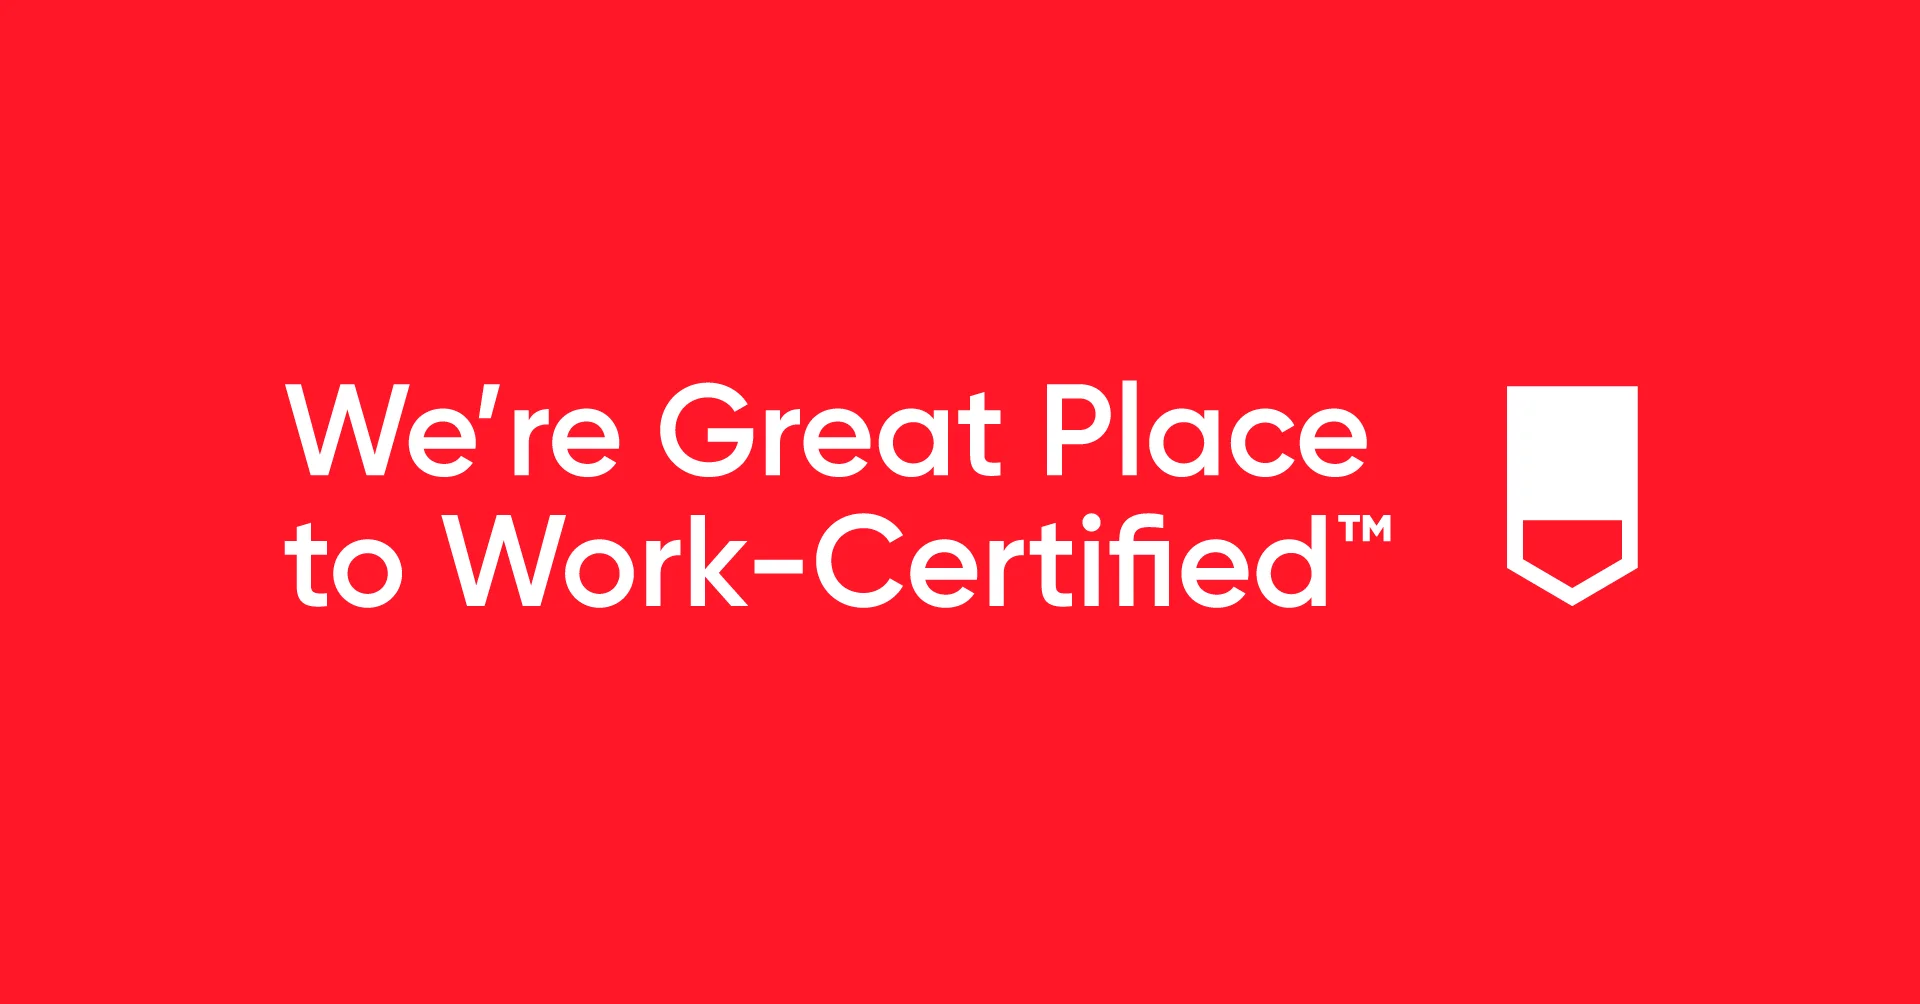  What does being a Great Place to Work Certified Organization mean?